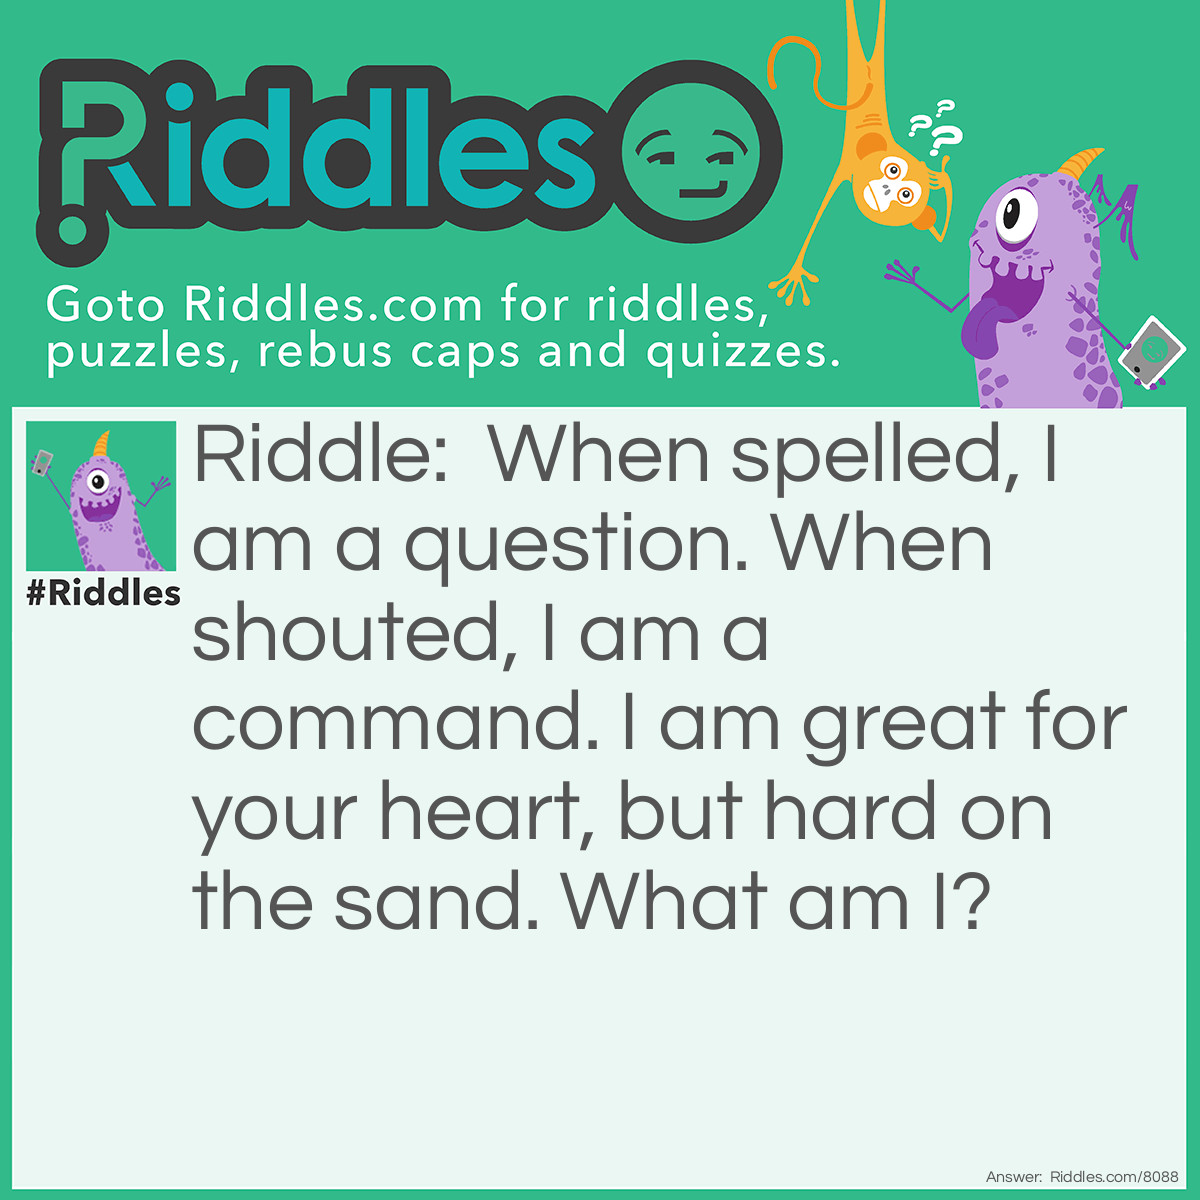 Riddle: When spelled, I am a question. When shouted, I am a command. I am great for your heart, but hard on the sand. What am I? Answer: RUN.